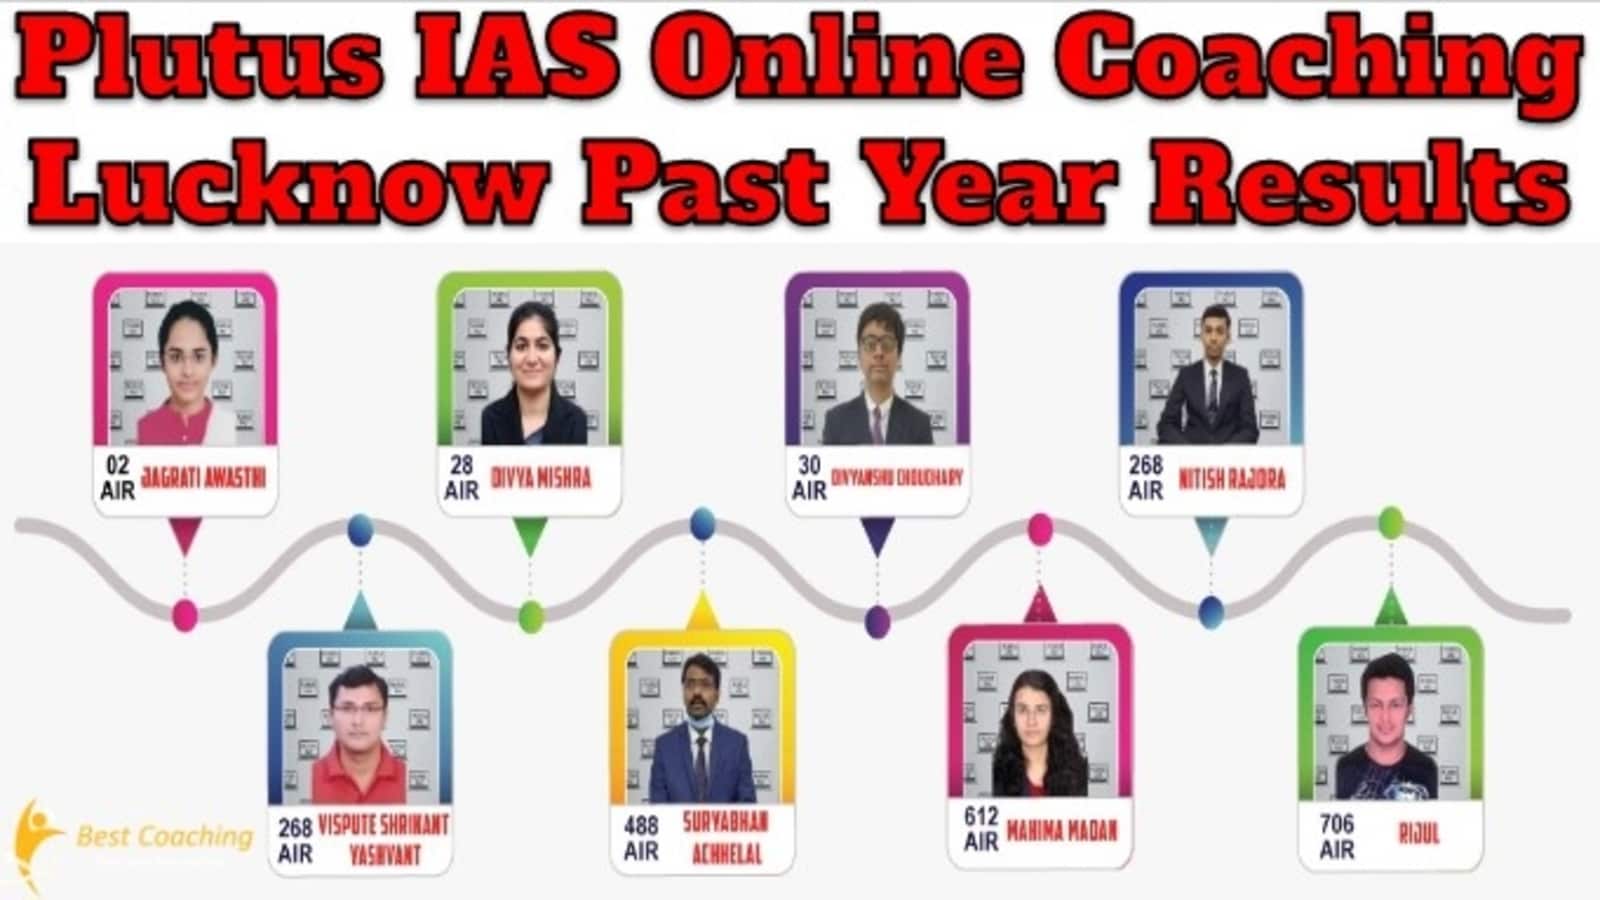 Plutus IAS Online Coaching Lucknow Past Year Results